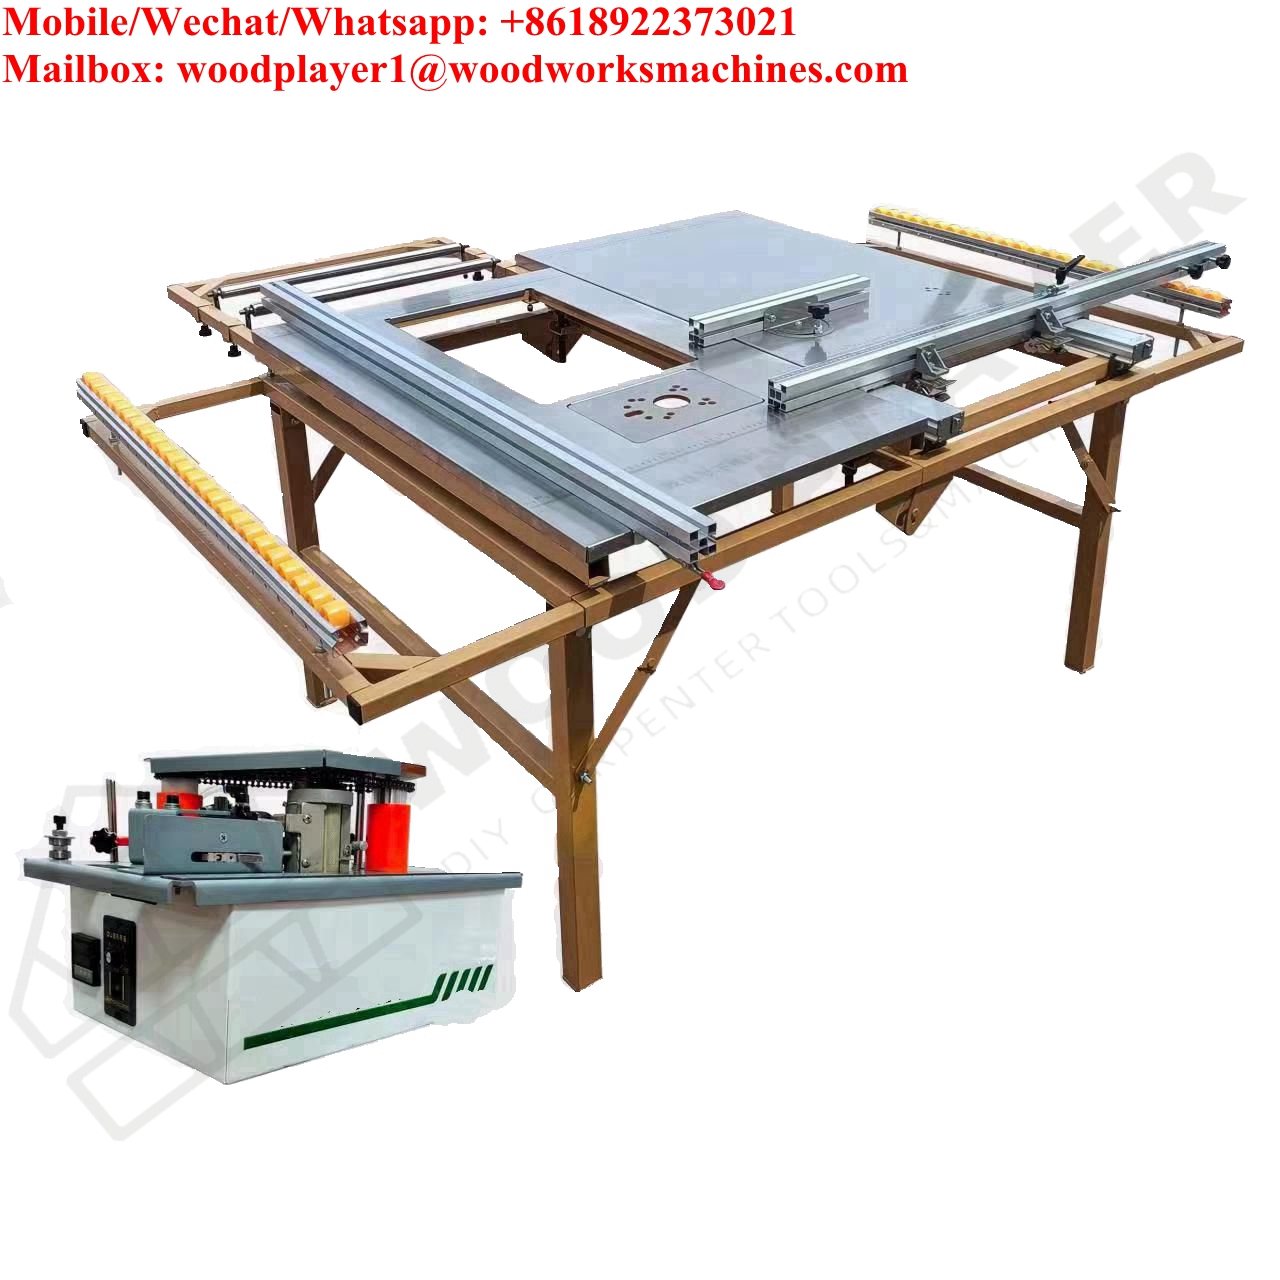 New F800 Saw Table With Electric Saw And Saw Table Mini Edge Banding Machine